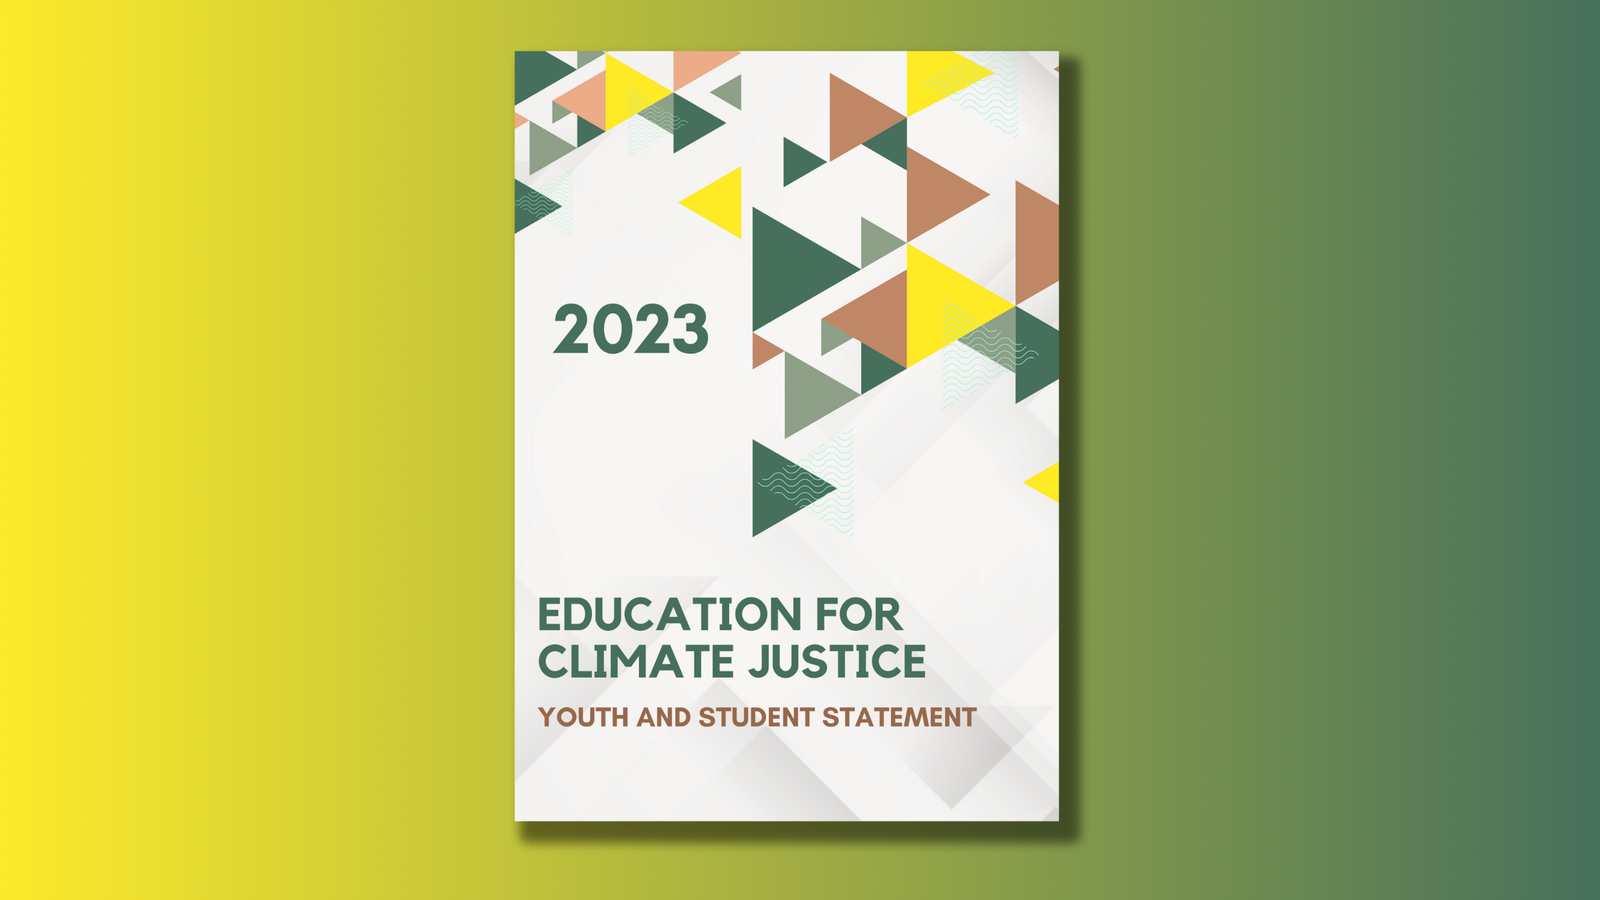 Empowering Youth and Students as Partners for Climate Justice in Education